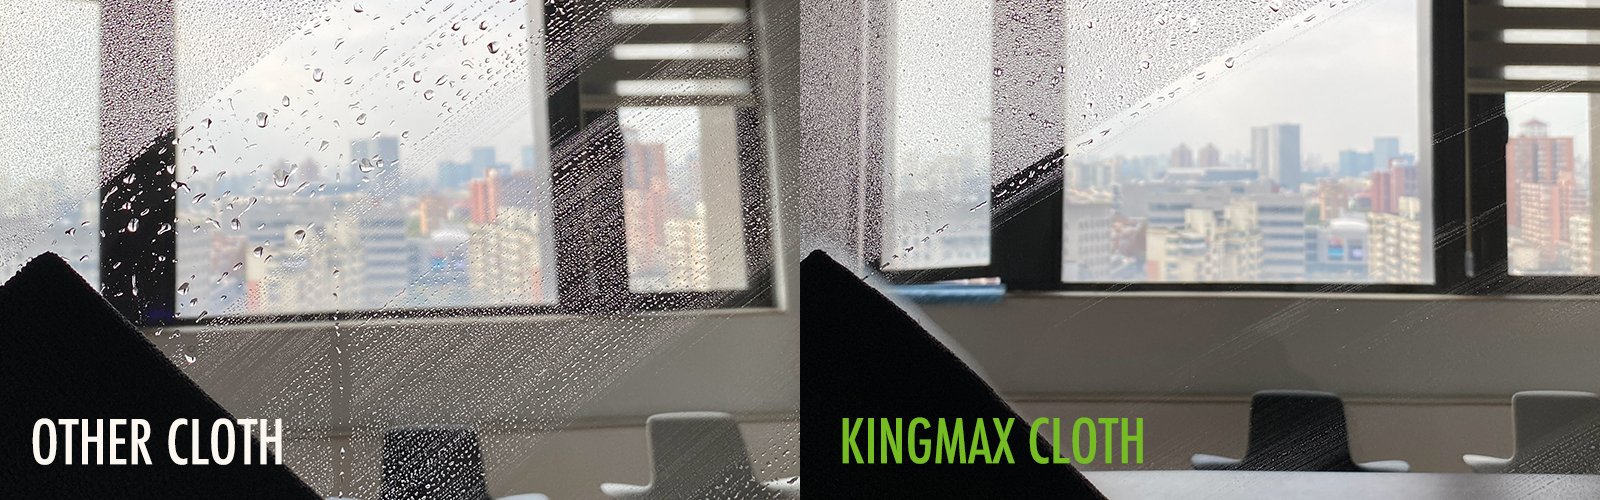 KINGMAX GREAT TOWEL is streak-free and lint-free, because it is made from AA recycled microfiber. As a qualified microfiber cloth manufacturer, KINGMAX supplies plain durable towel, antimicrobial cloth and bleachable towel to purchasers and wholesalers.